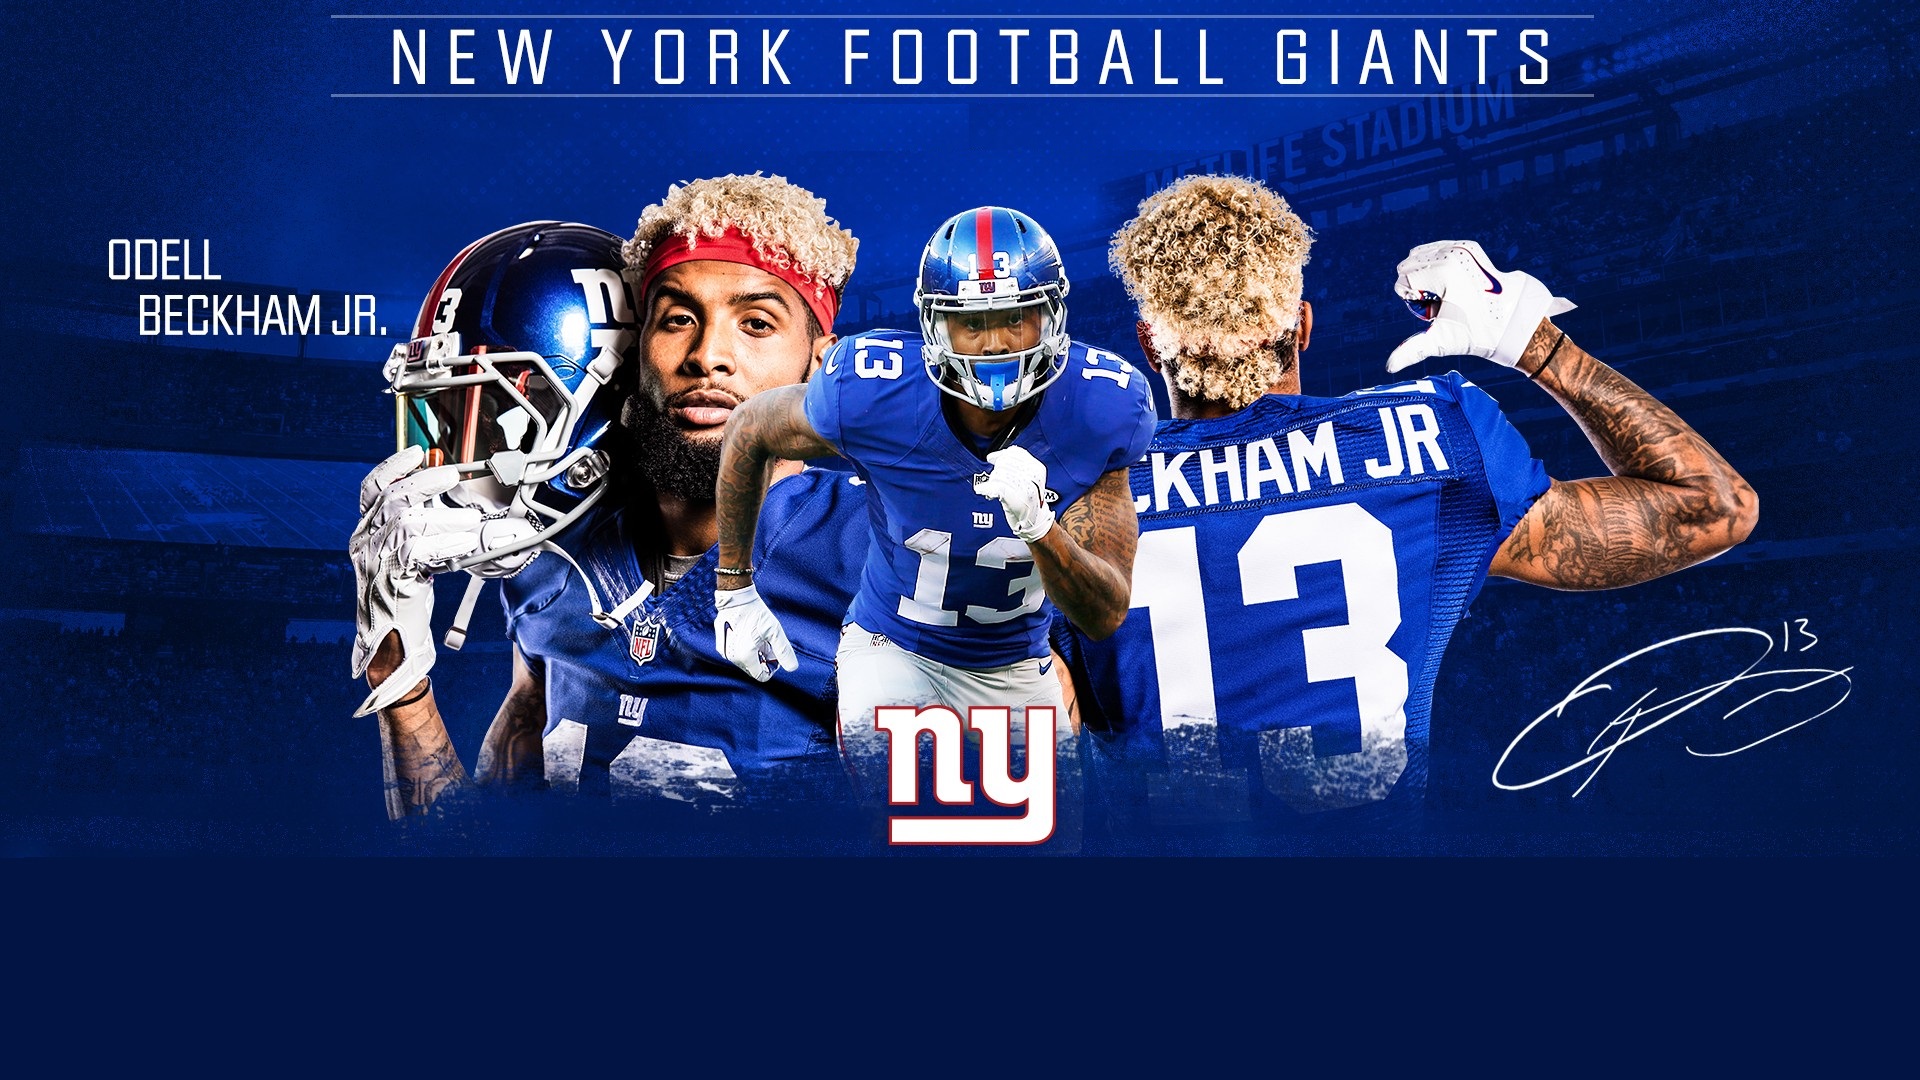 HD Desktop Wallpaper New York Giants With high-resolution 1920X1080 pixel. You can use this wallpaper for your Mac or Windows Desktop Background, iPhone, Android or Tablet and another Smartphone device